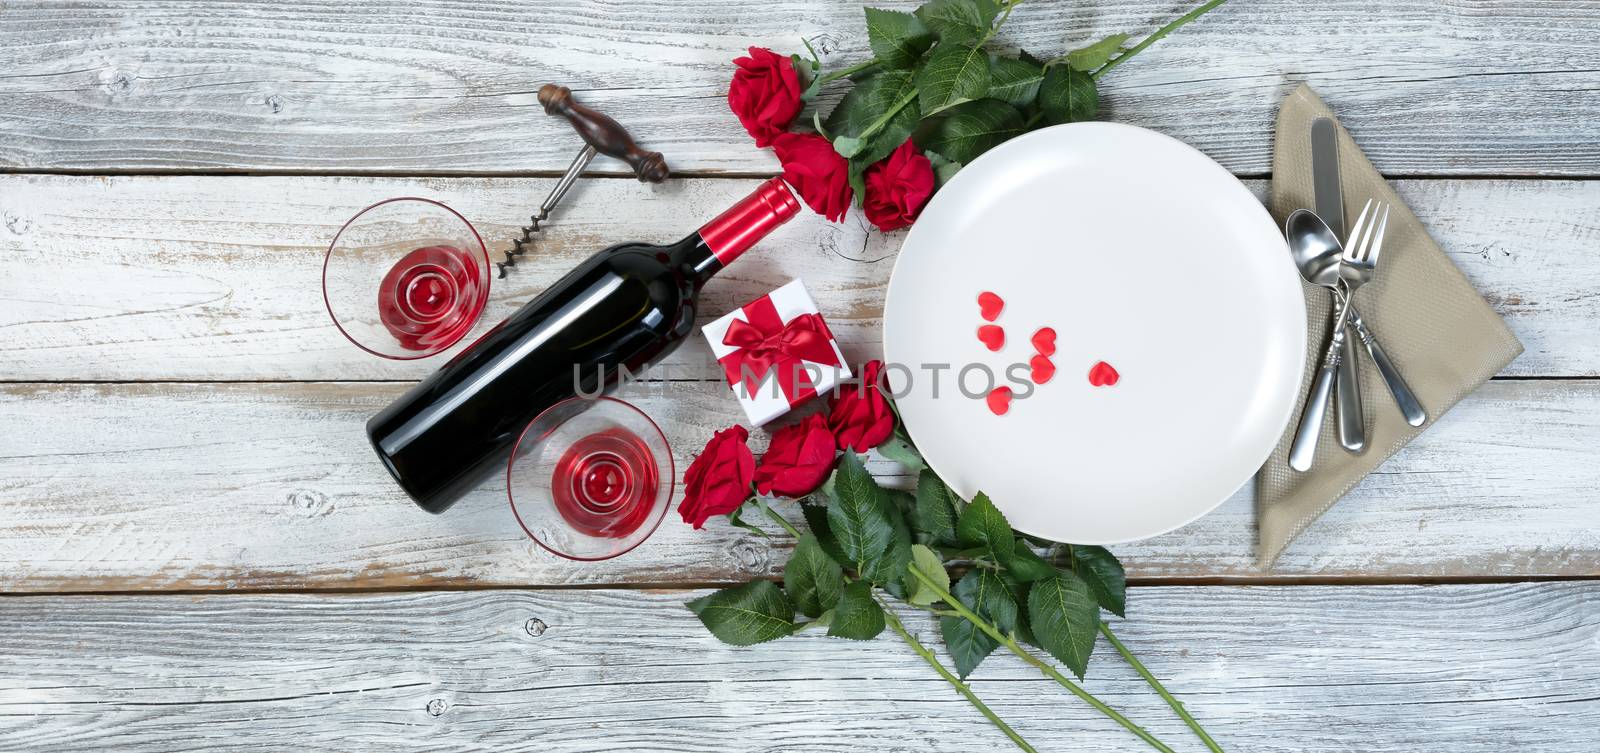 Valentine dinner with wine and roses on rustic wooden table  by tab1962